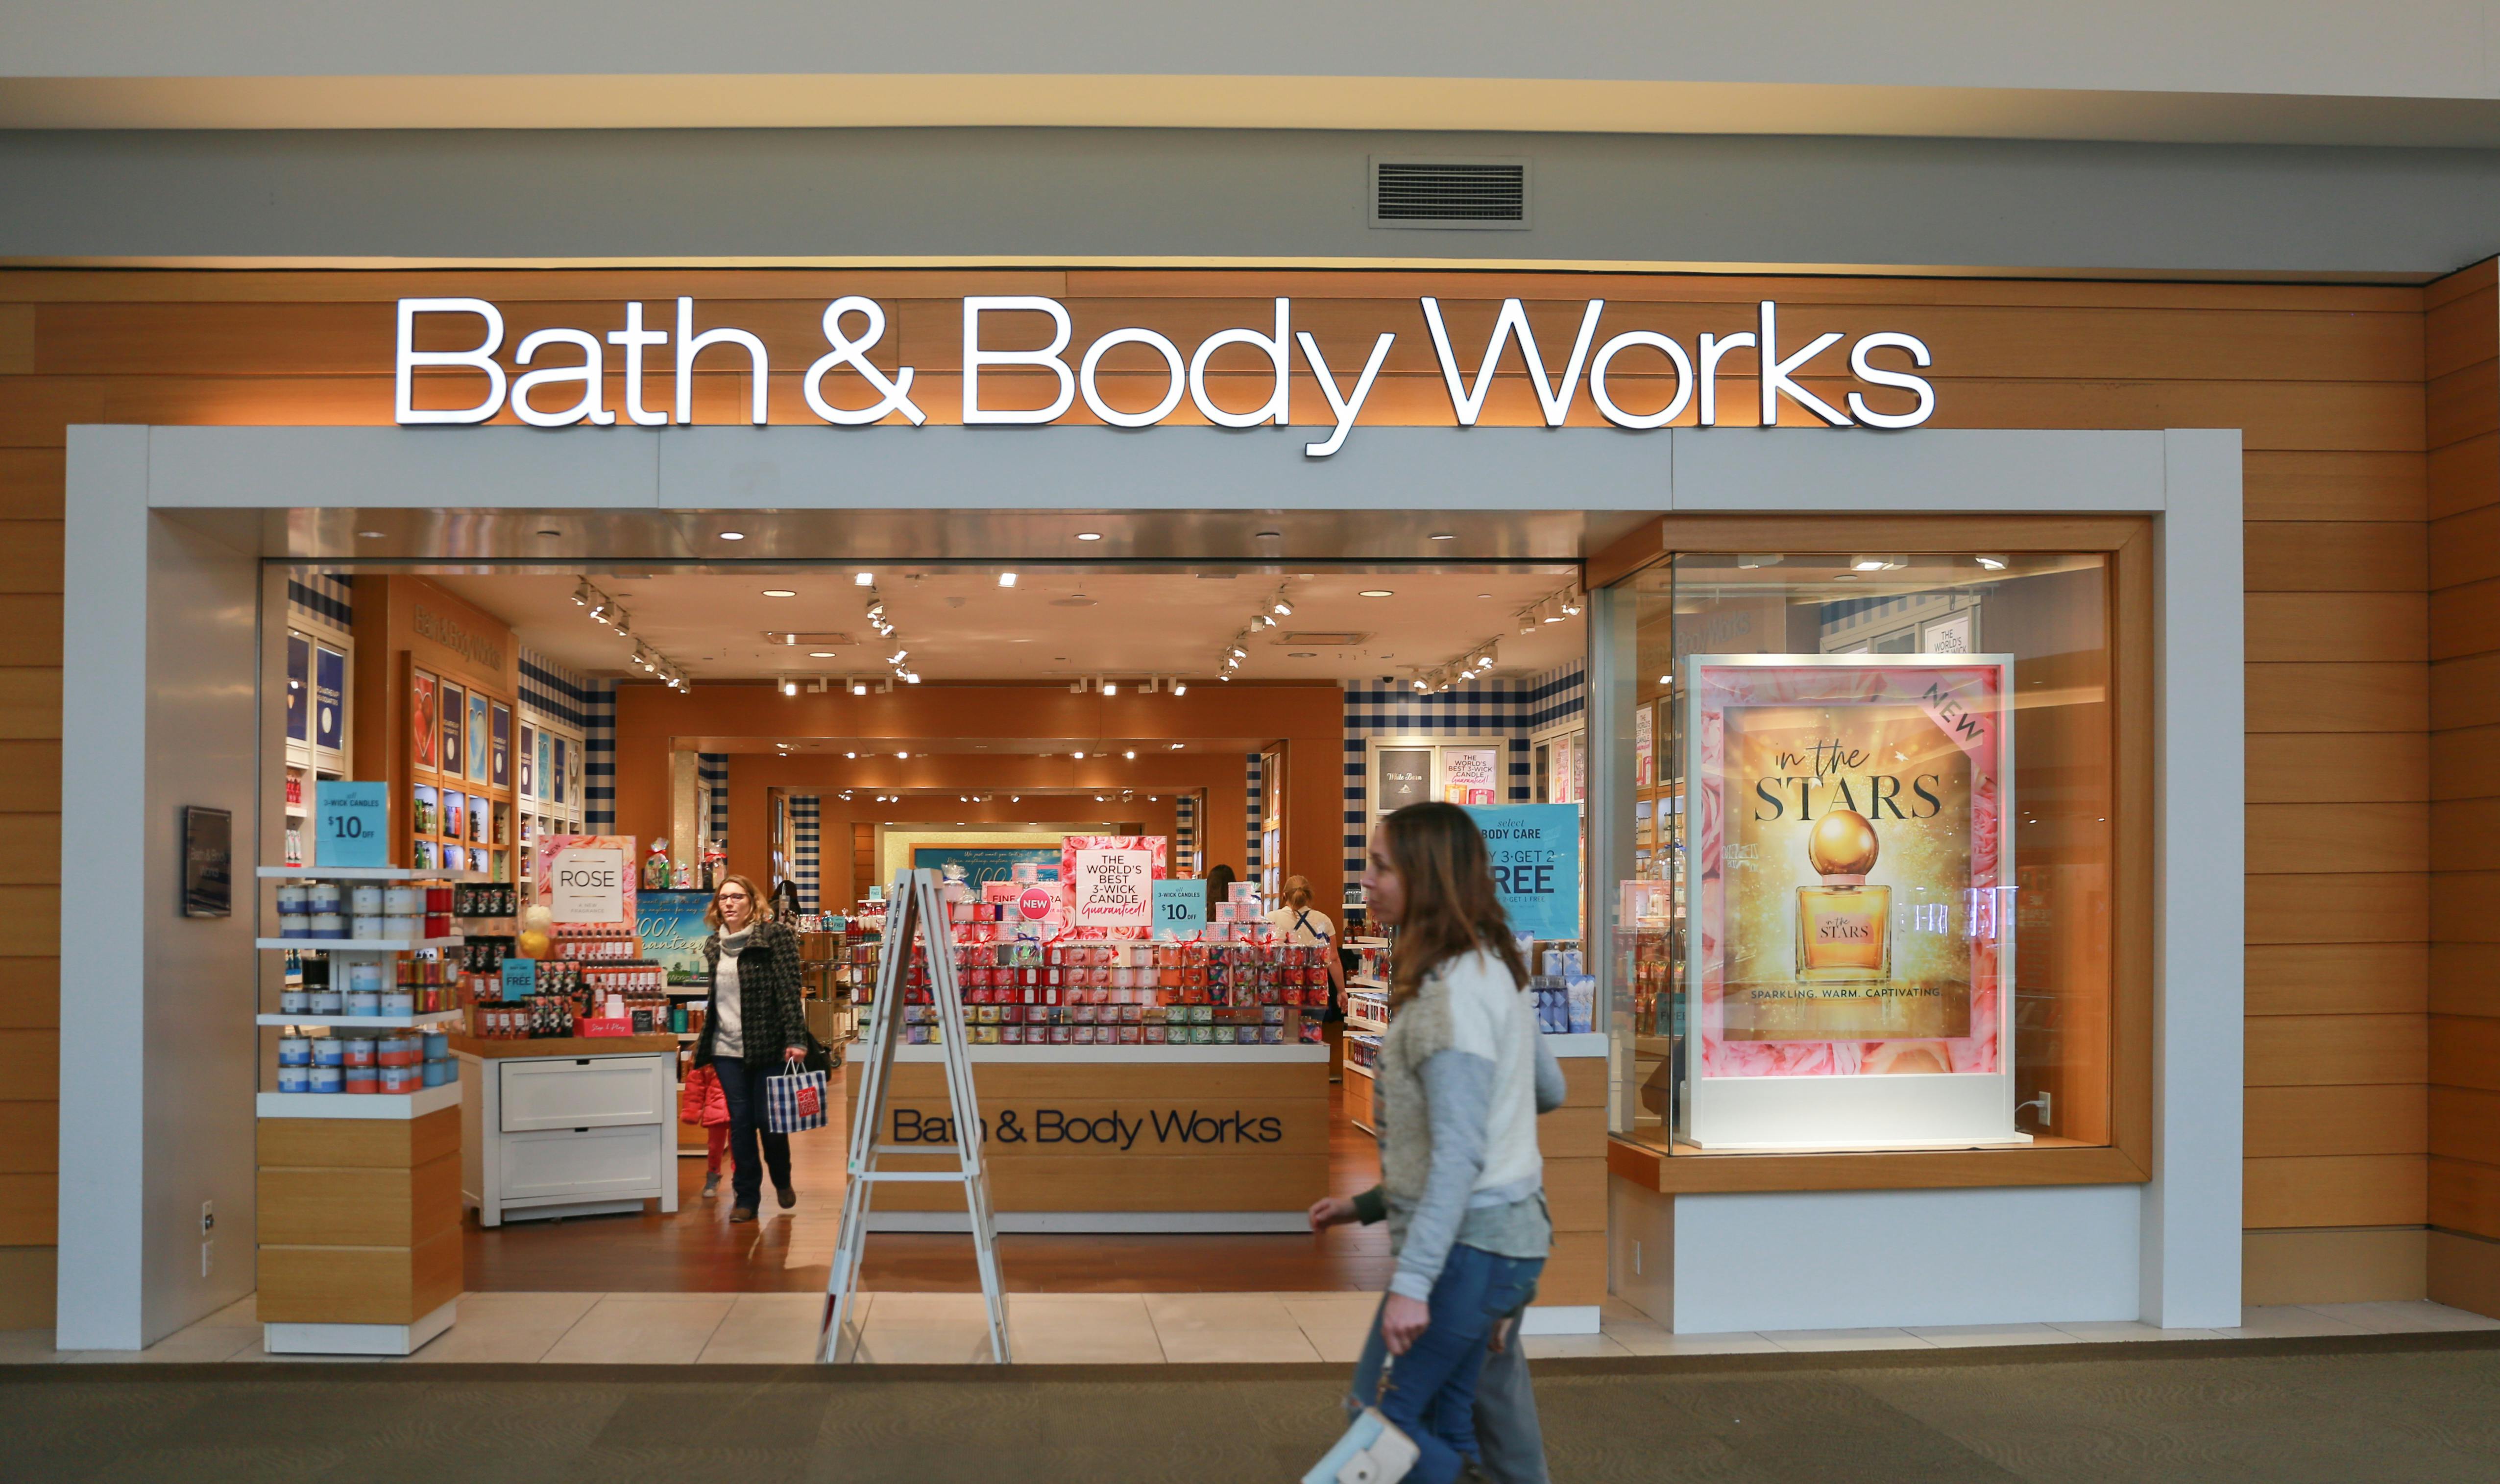 bath and body works entrance in mall with passersby